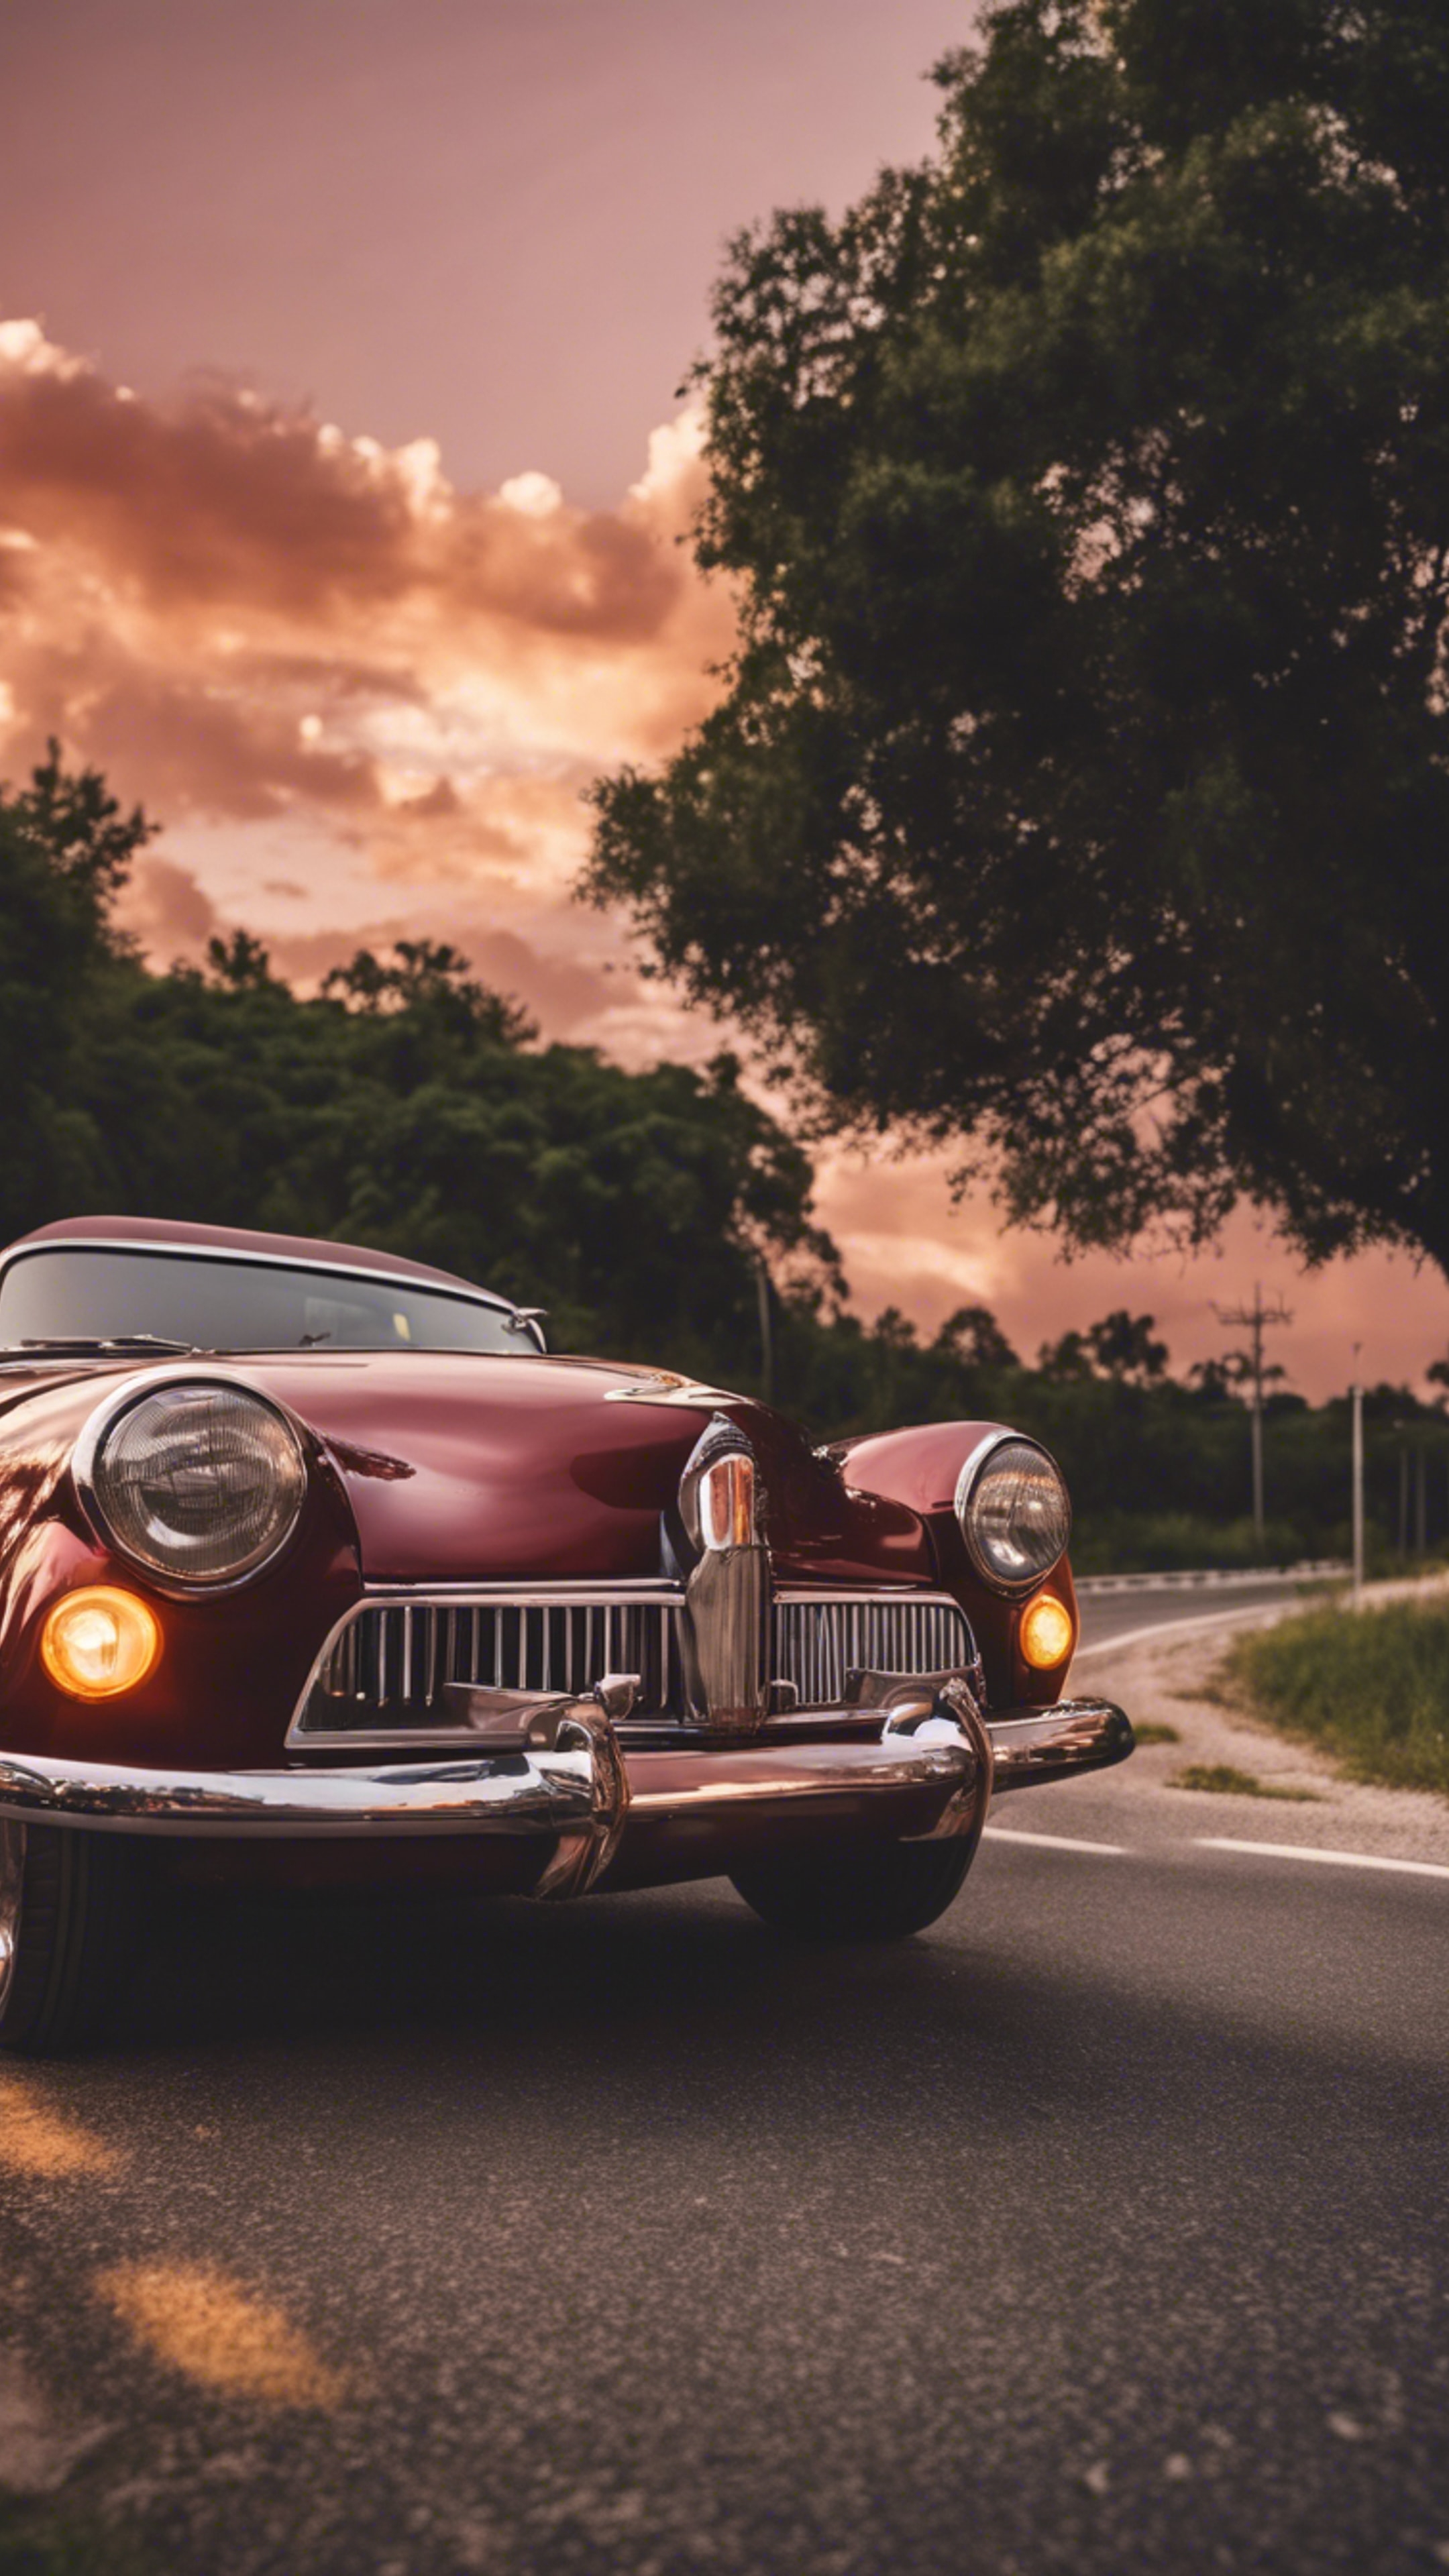 A cool maroon vintage car cruising down a highway during sunset. 벽지[f4173fef60b3476589ab]